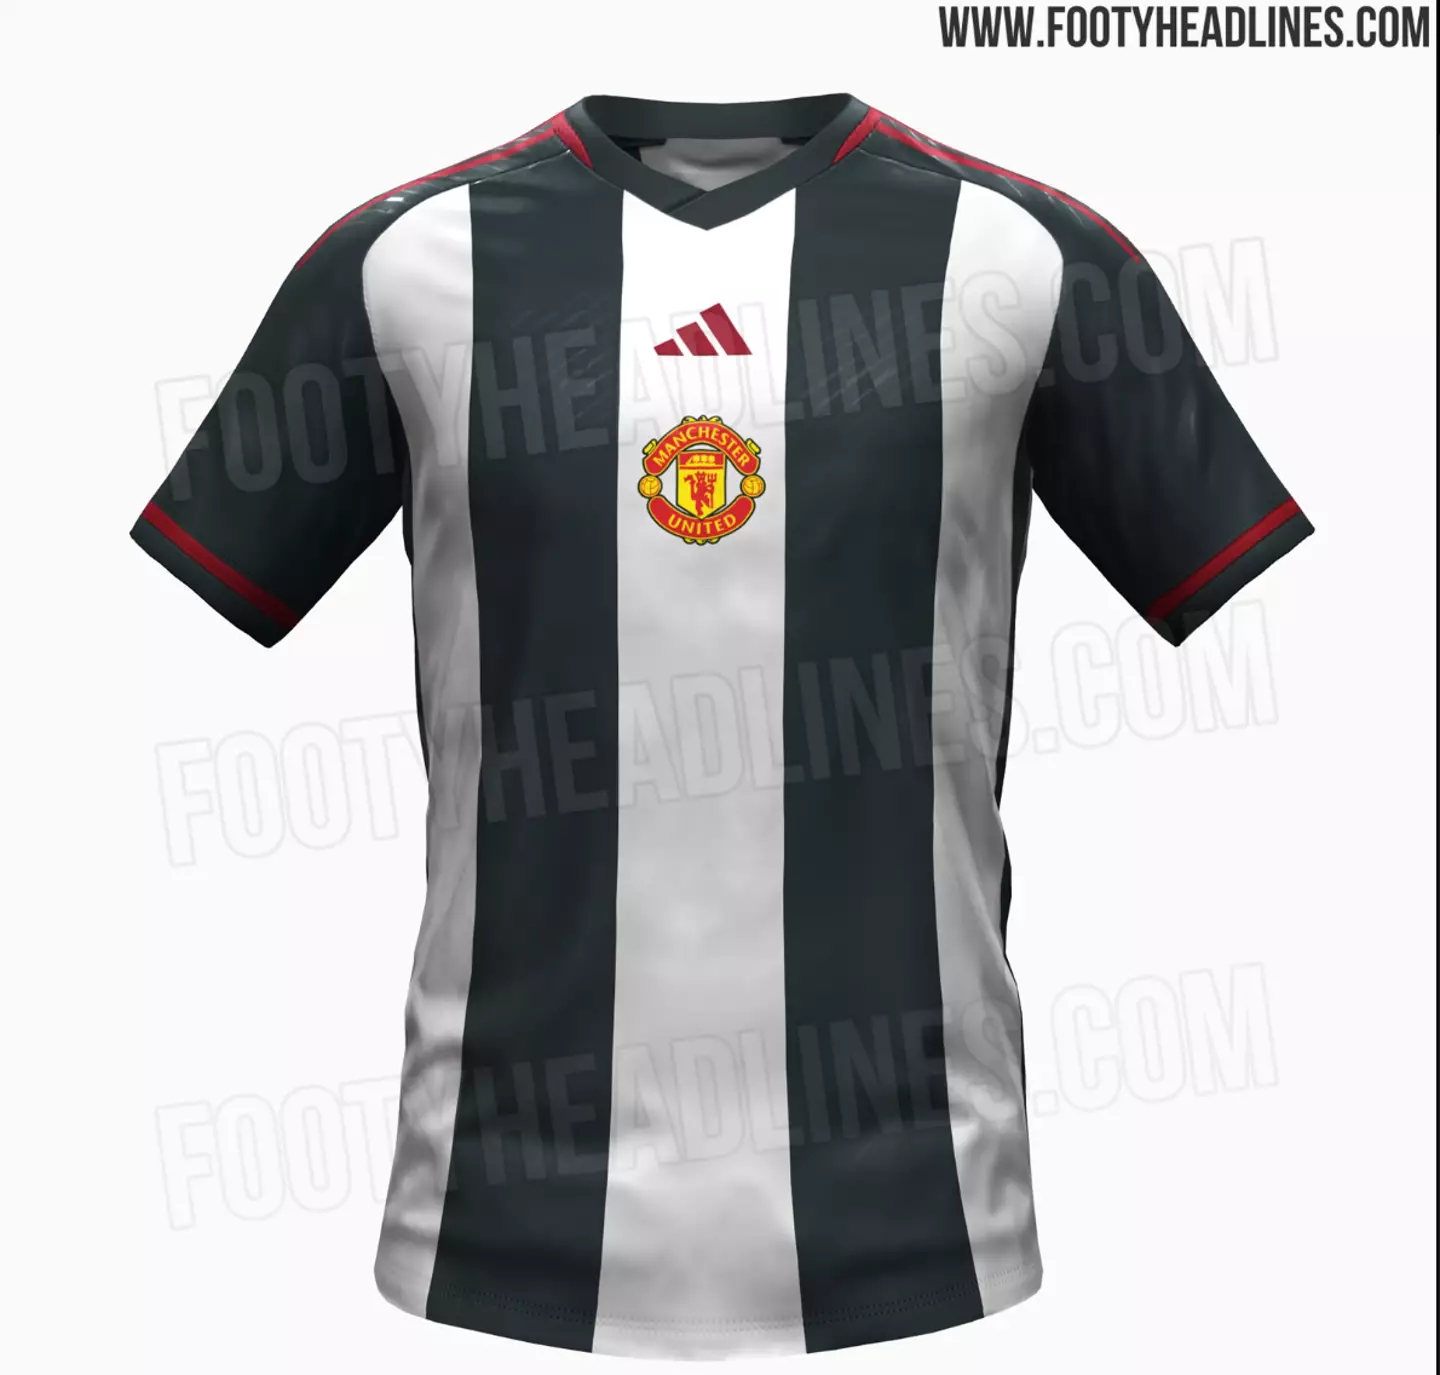 United's potential shirt for the 2023/24 season. Image: FootyHeadlines